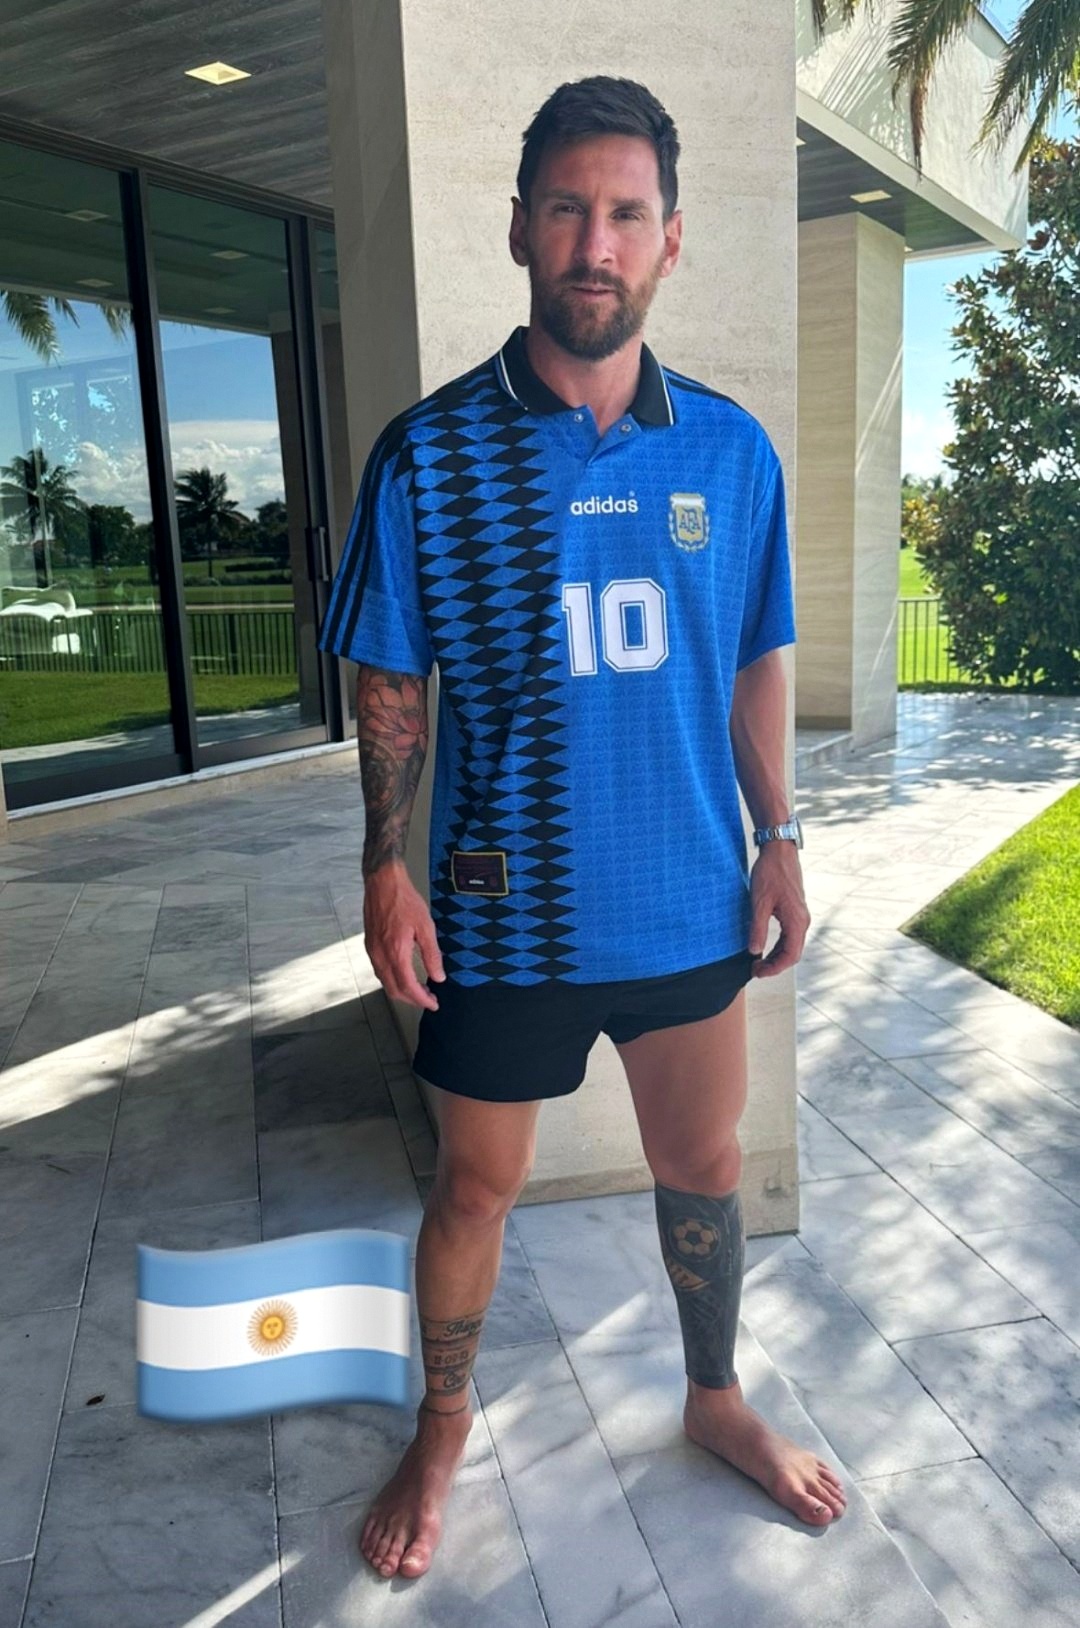 Man City star Julian Alvarez joined with Lionel Messi to wears a remake of the 1994 Argentina shirt worn by Diego Maradona